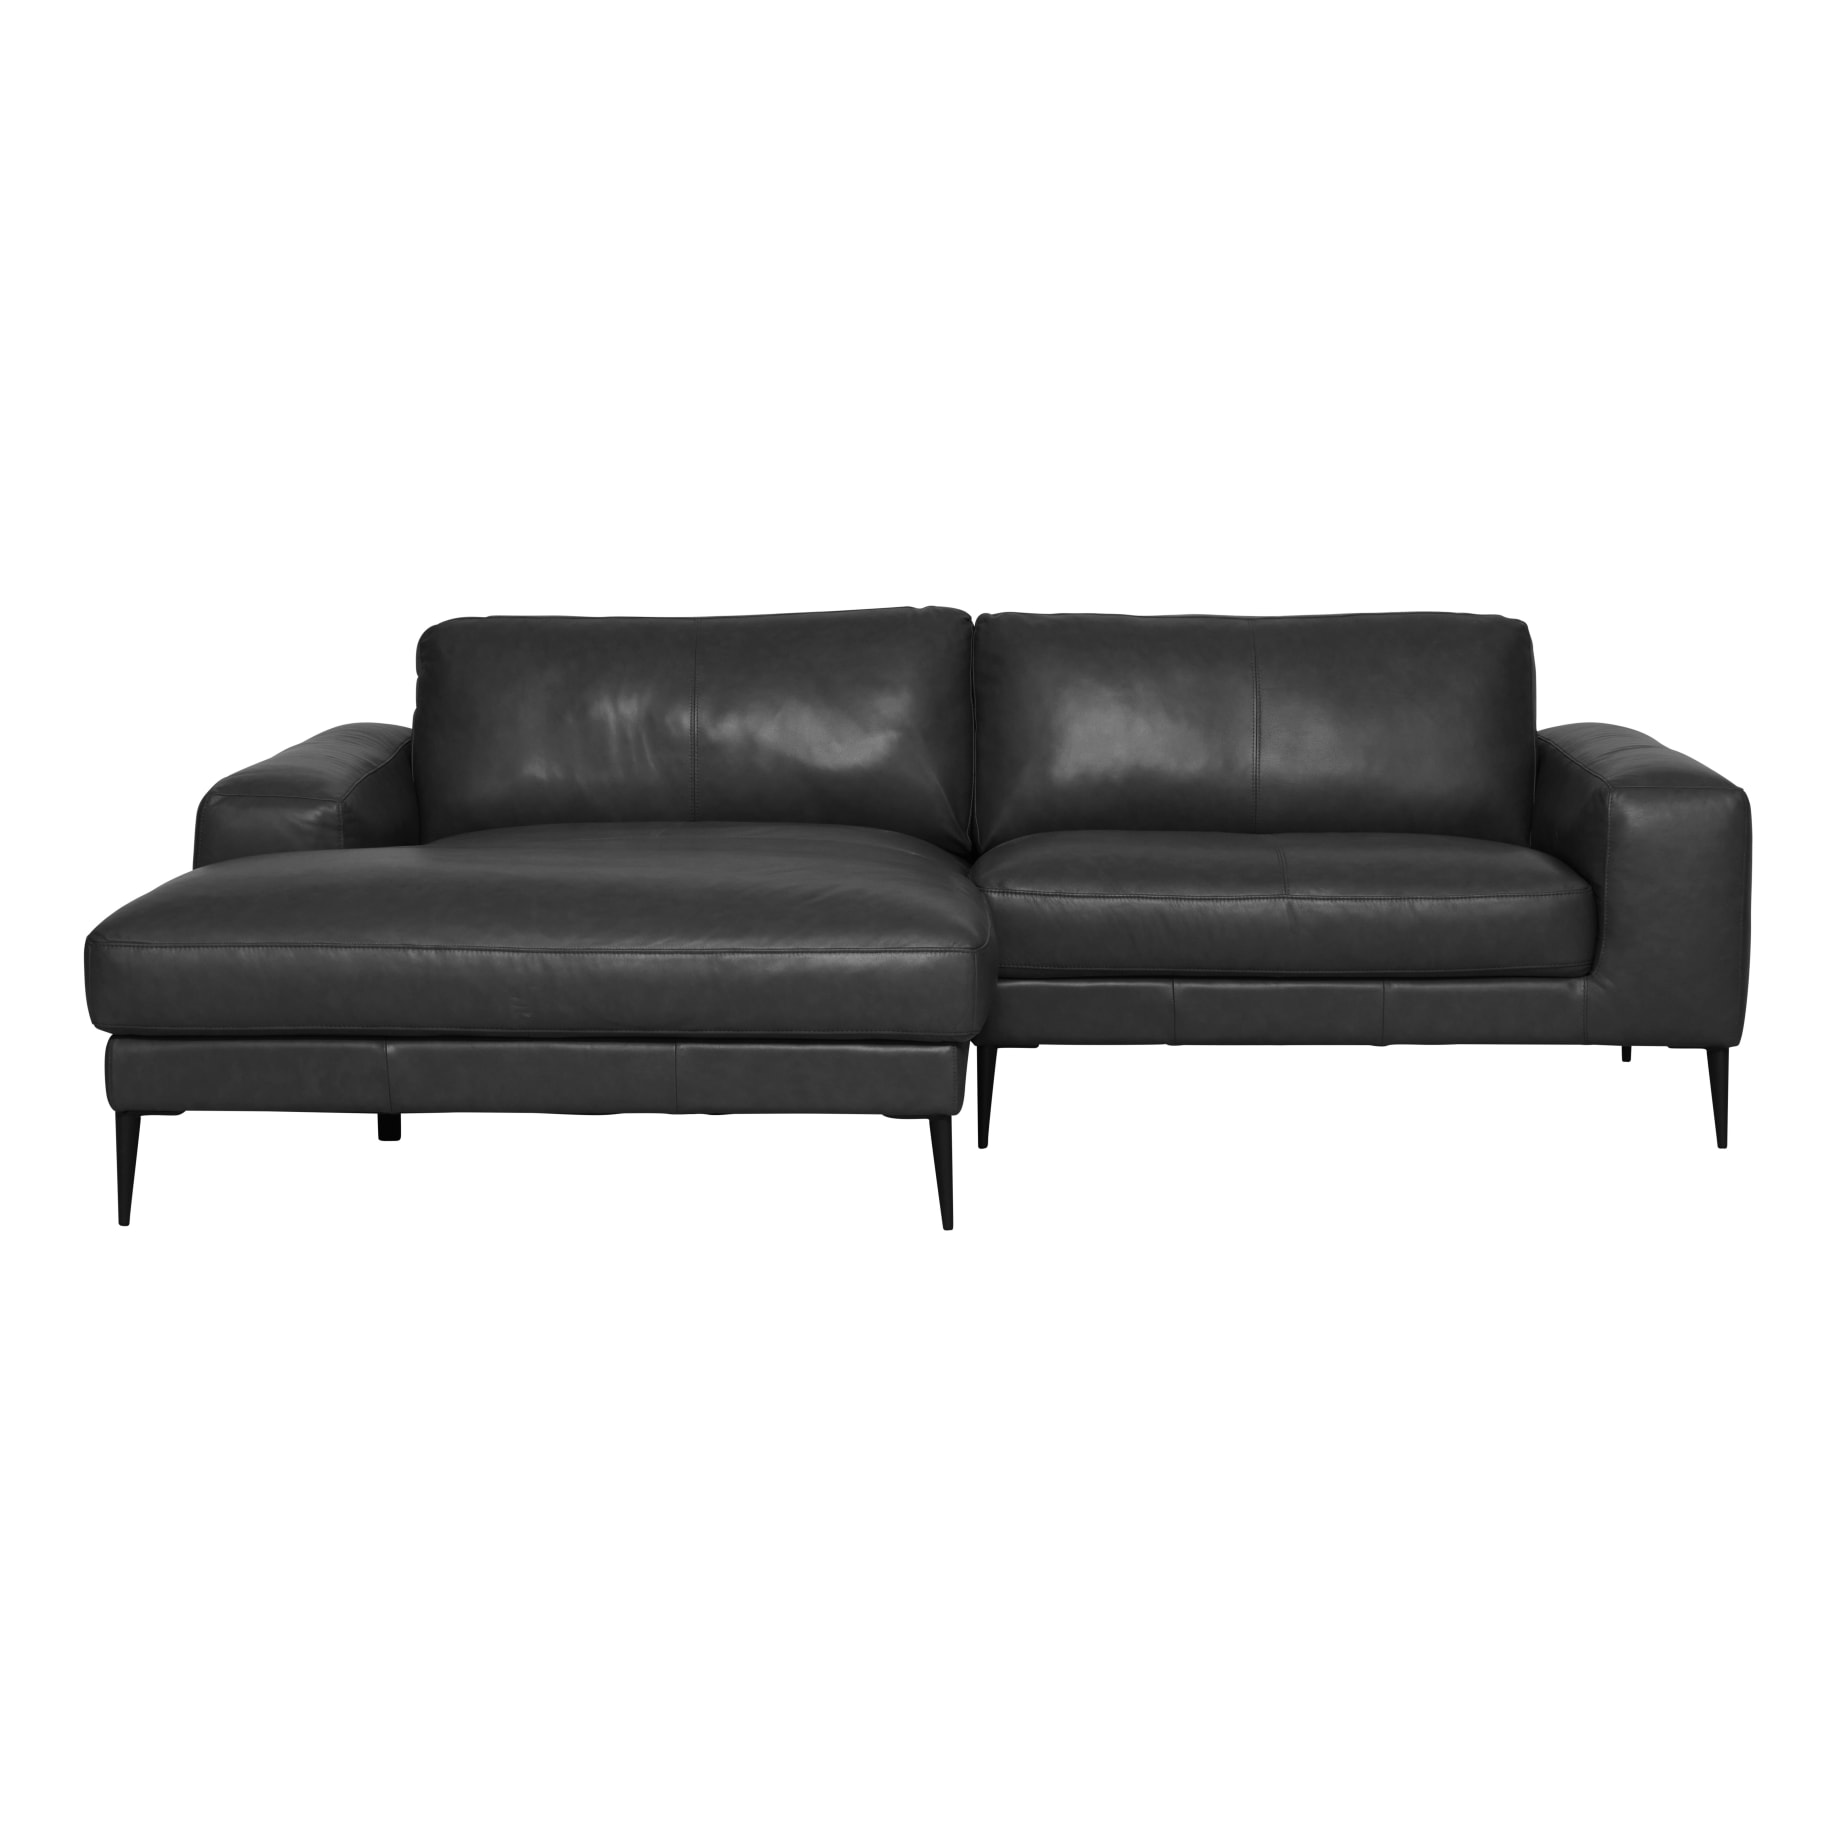 Amory Double Chaise Sofa LHF in Alpine Leather